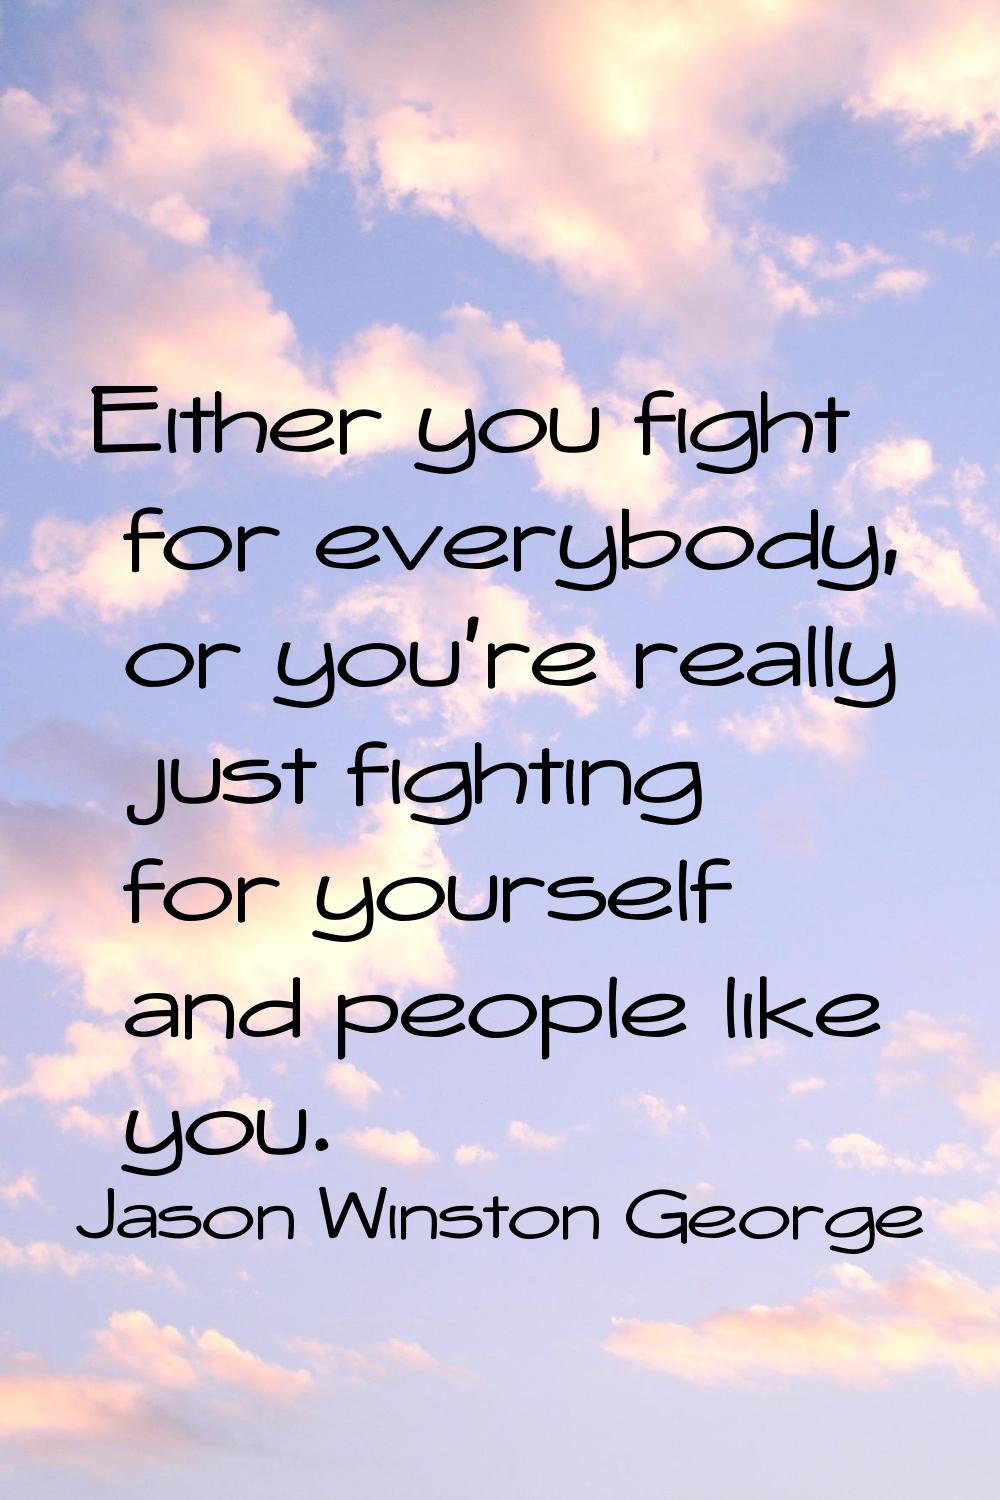 Either you fight for everybody, or you're really just fighting for yourself and people like you.